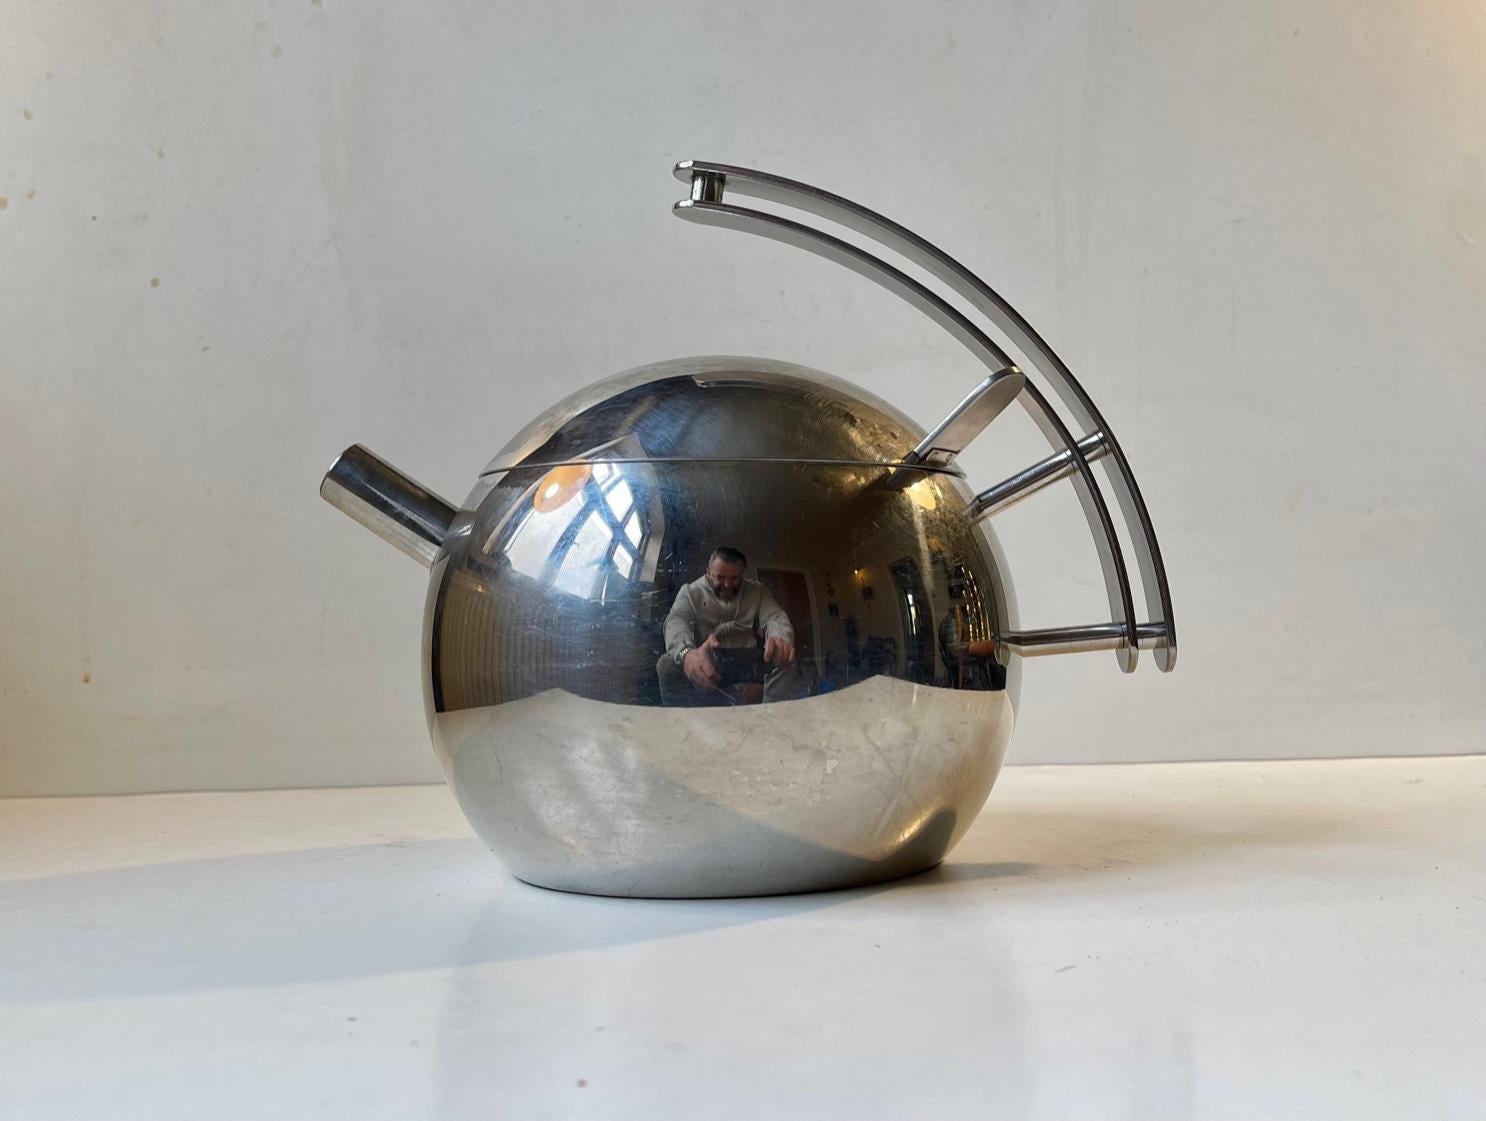 Minimalistic teapot in mirror polished stainless steel. Designed and manufactured by Arcimede Stella Collection in Italy during the 1980s in a style reminiscent of Stelton and Arne Jacobsen. Measurements: height: 21 cm, diameter: 18 cm. Capacity up